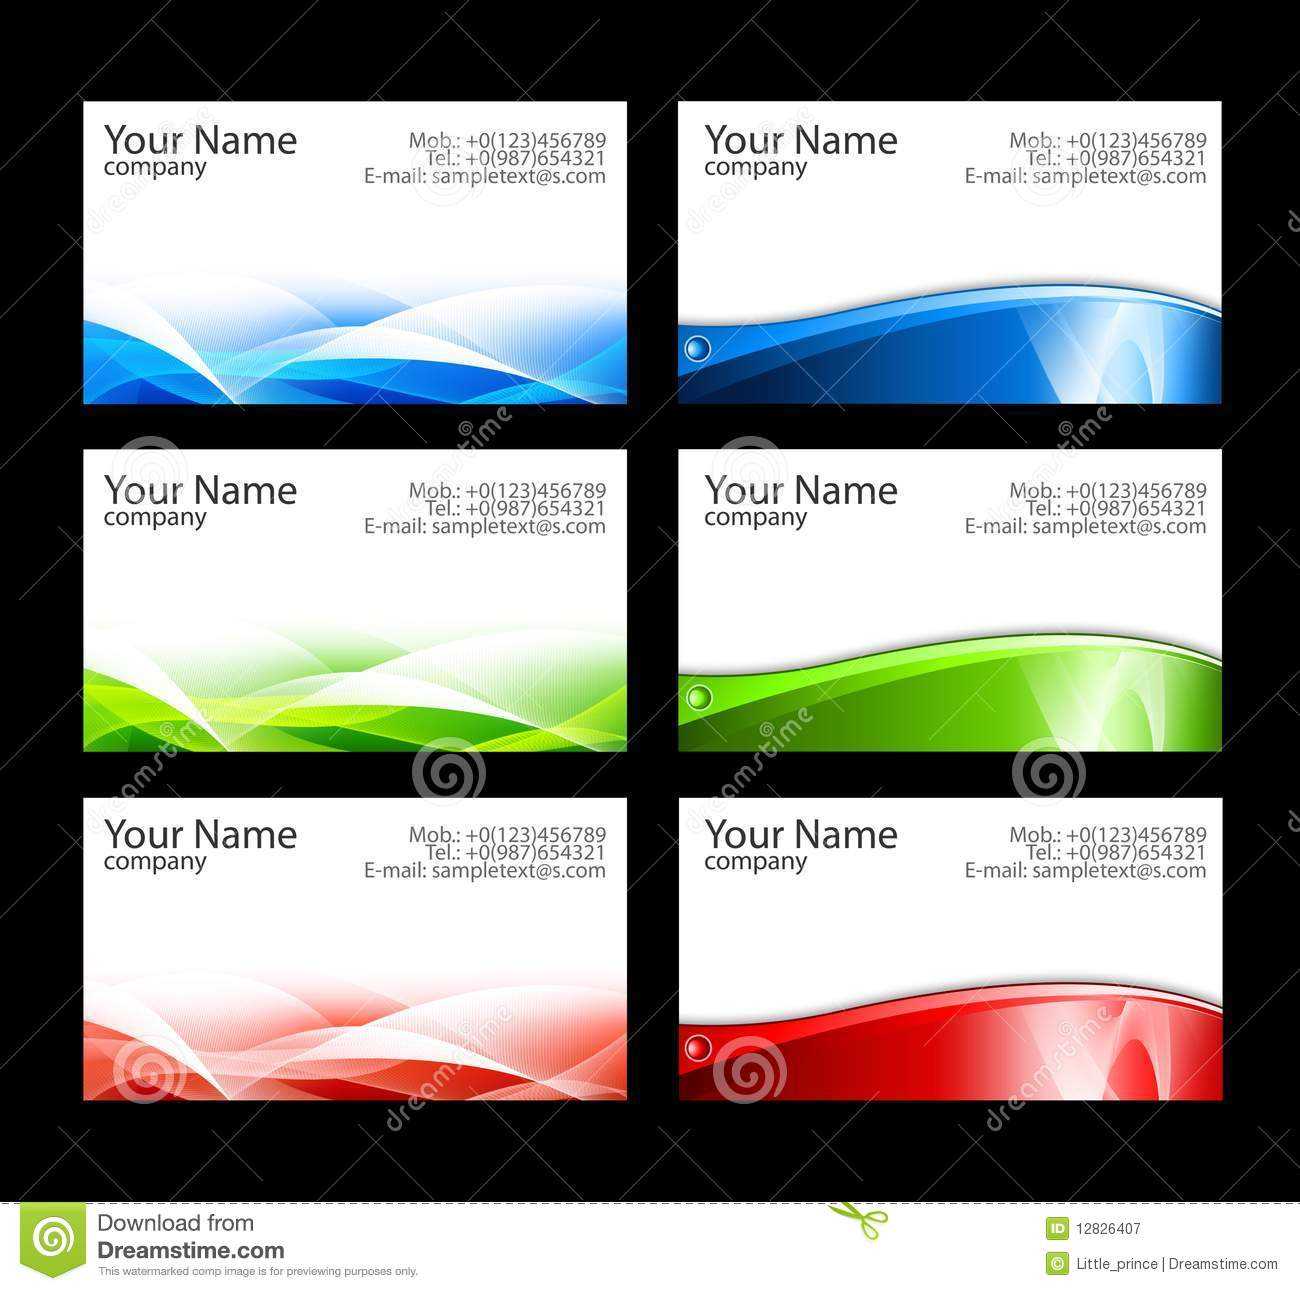 Business Cards Templates Stock Illustration. Illustration Of Intended For Call Card Templates